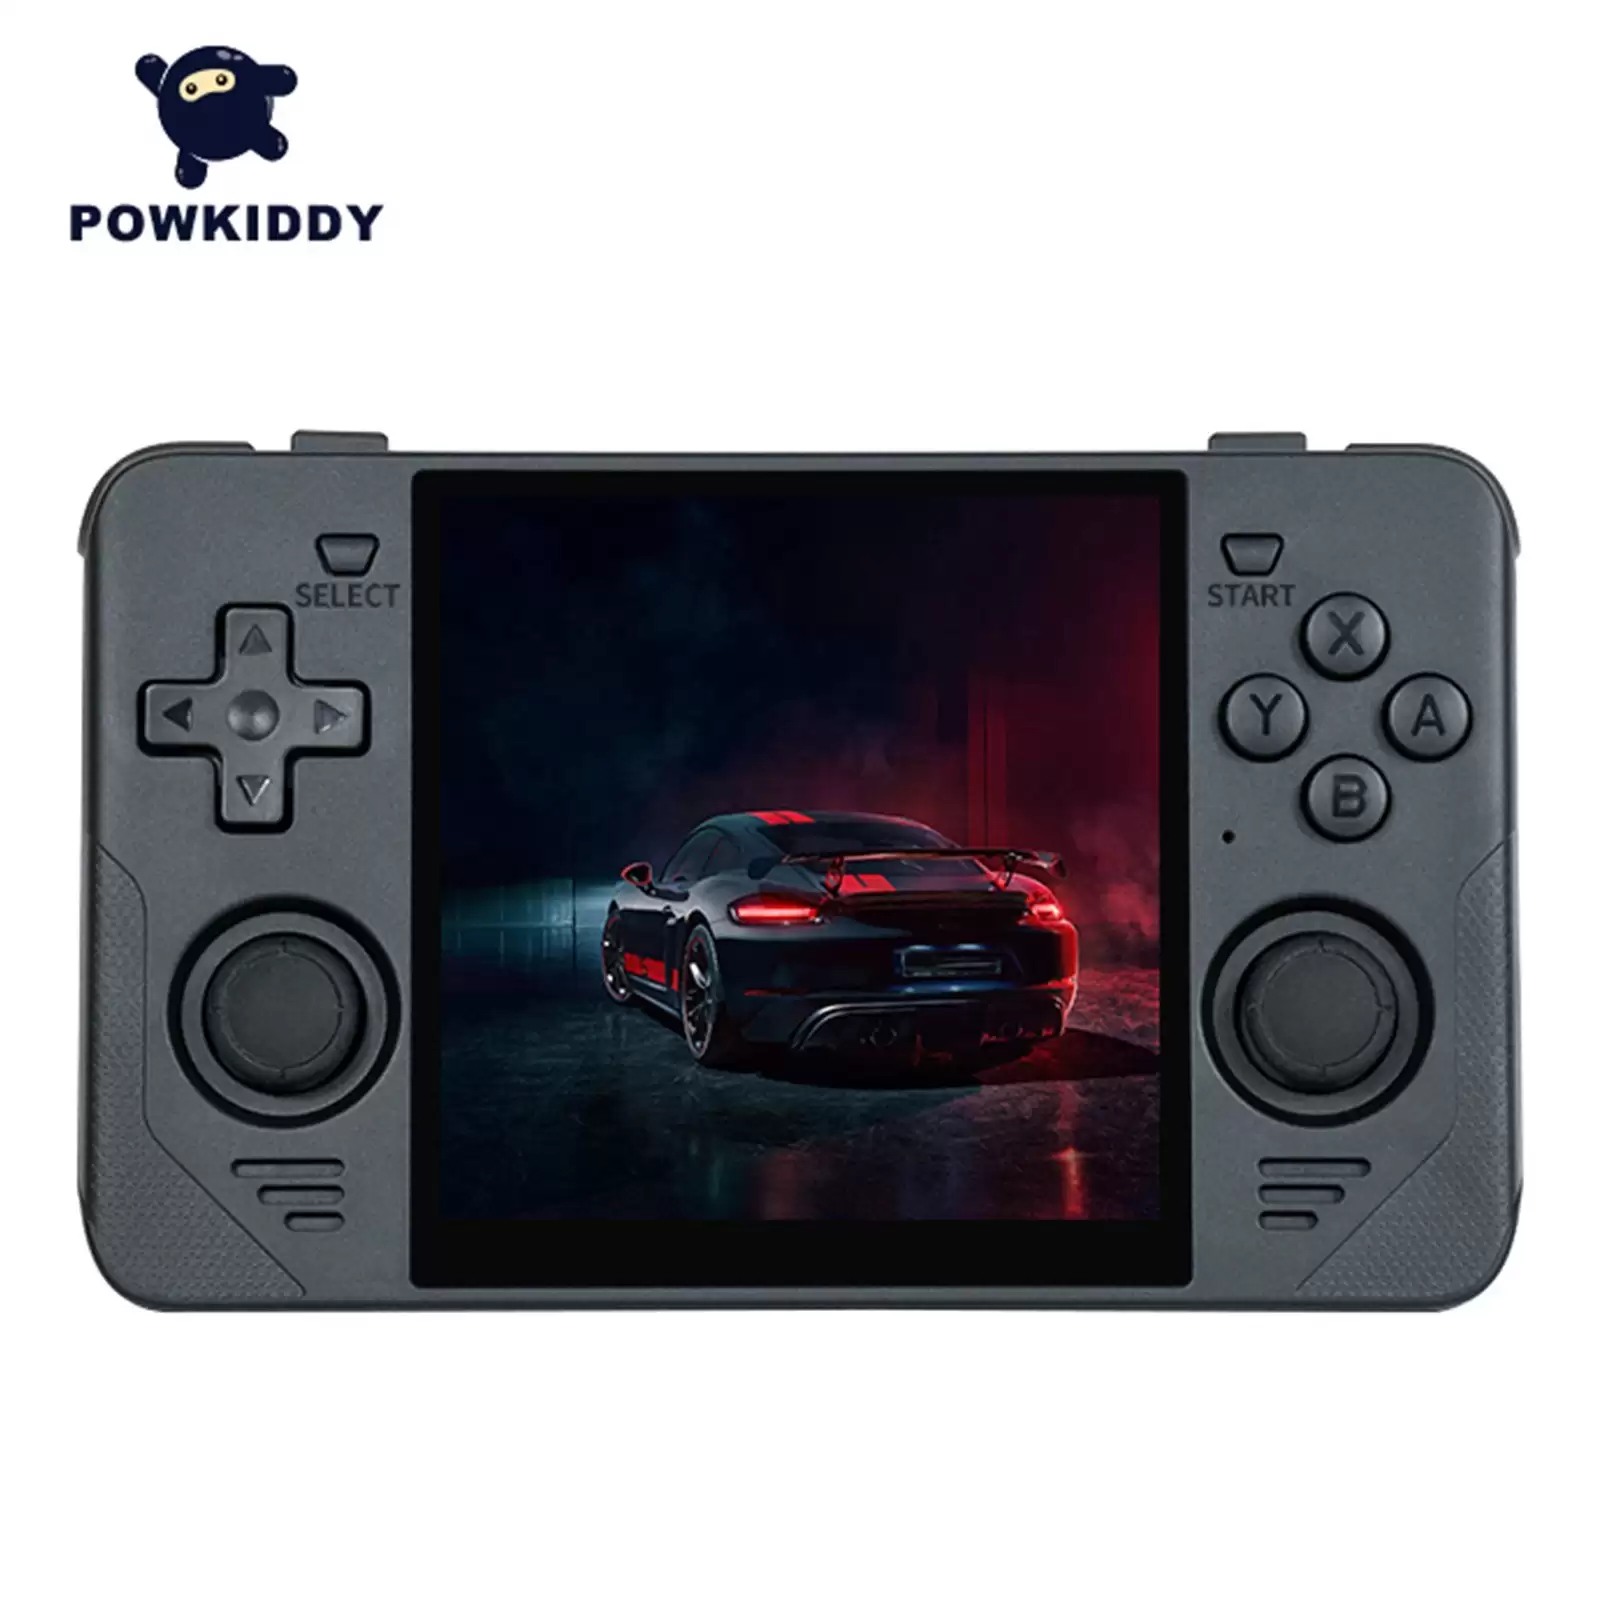 Get Extra 49% Off On Powkiddy Rgb30 Consoles Portable Handheld Game, $94.99 (inclusive Of Vat) At Tomtop